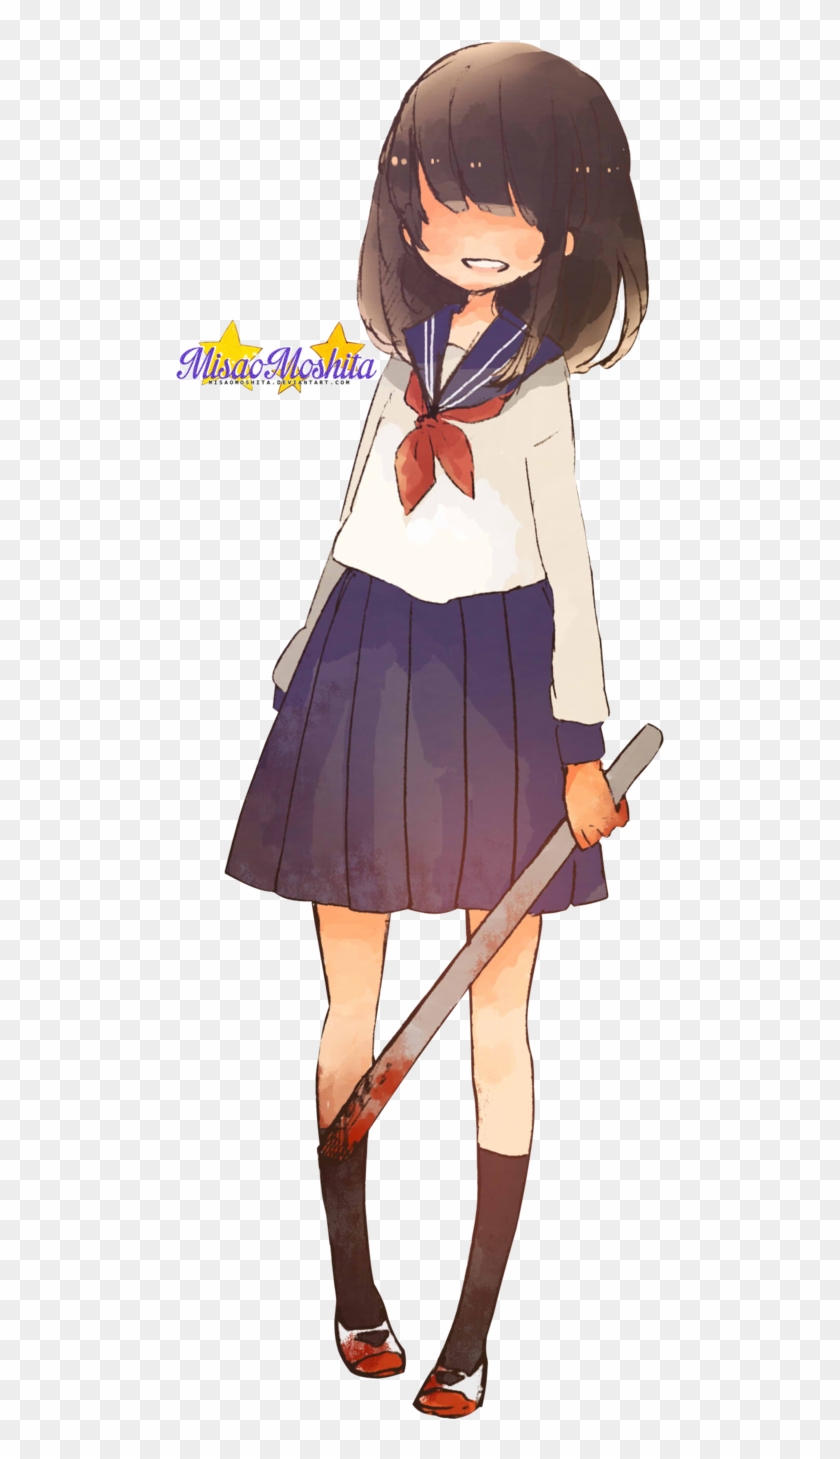 A brooding sketch of a animepop character standing defiantly with a baseball  bat | Photos